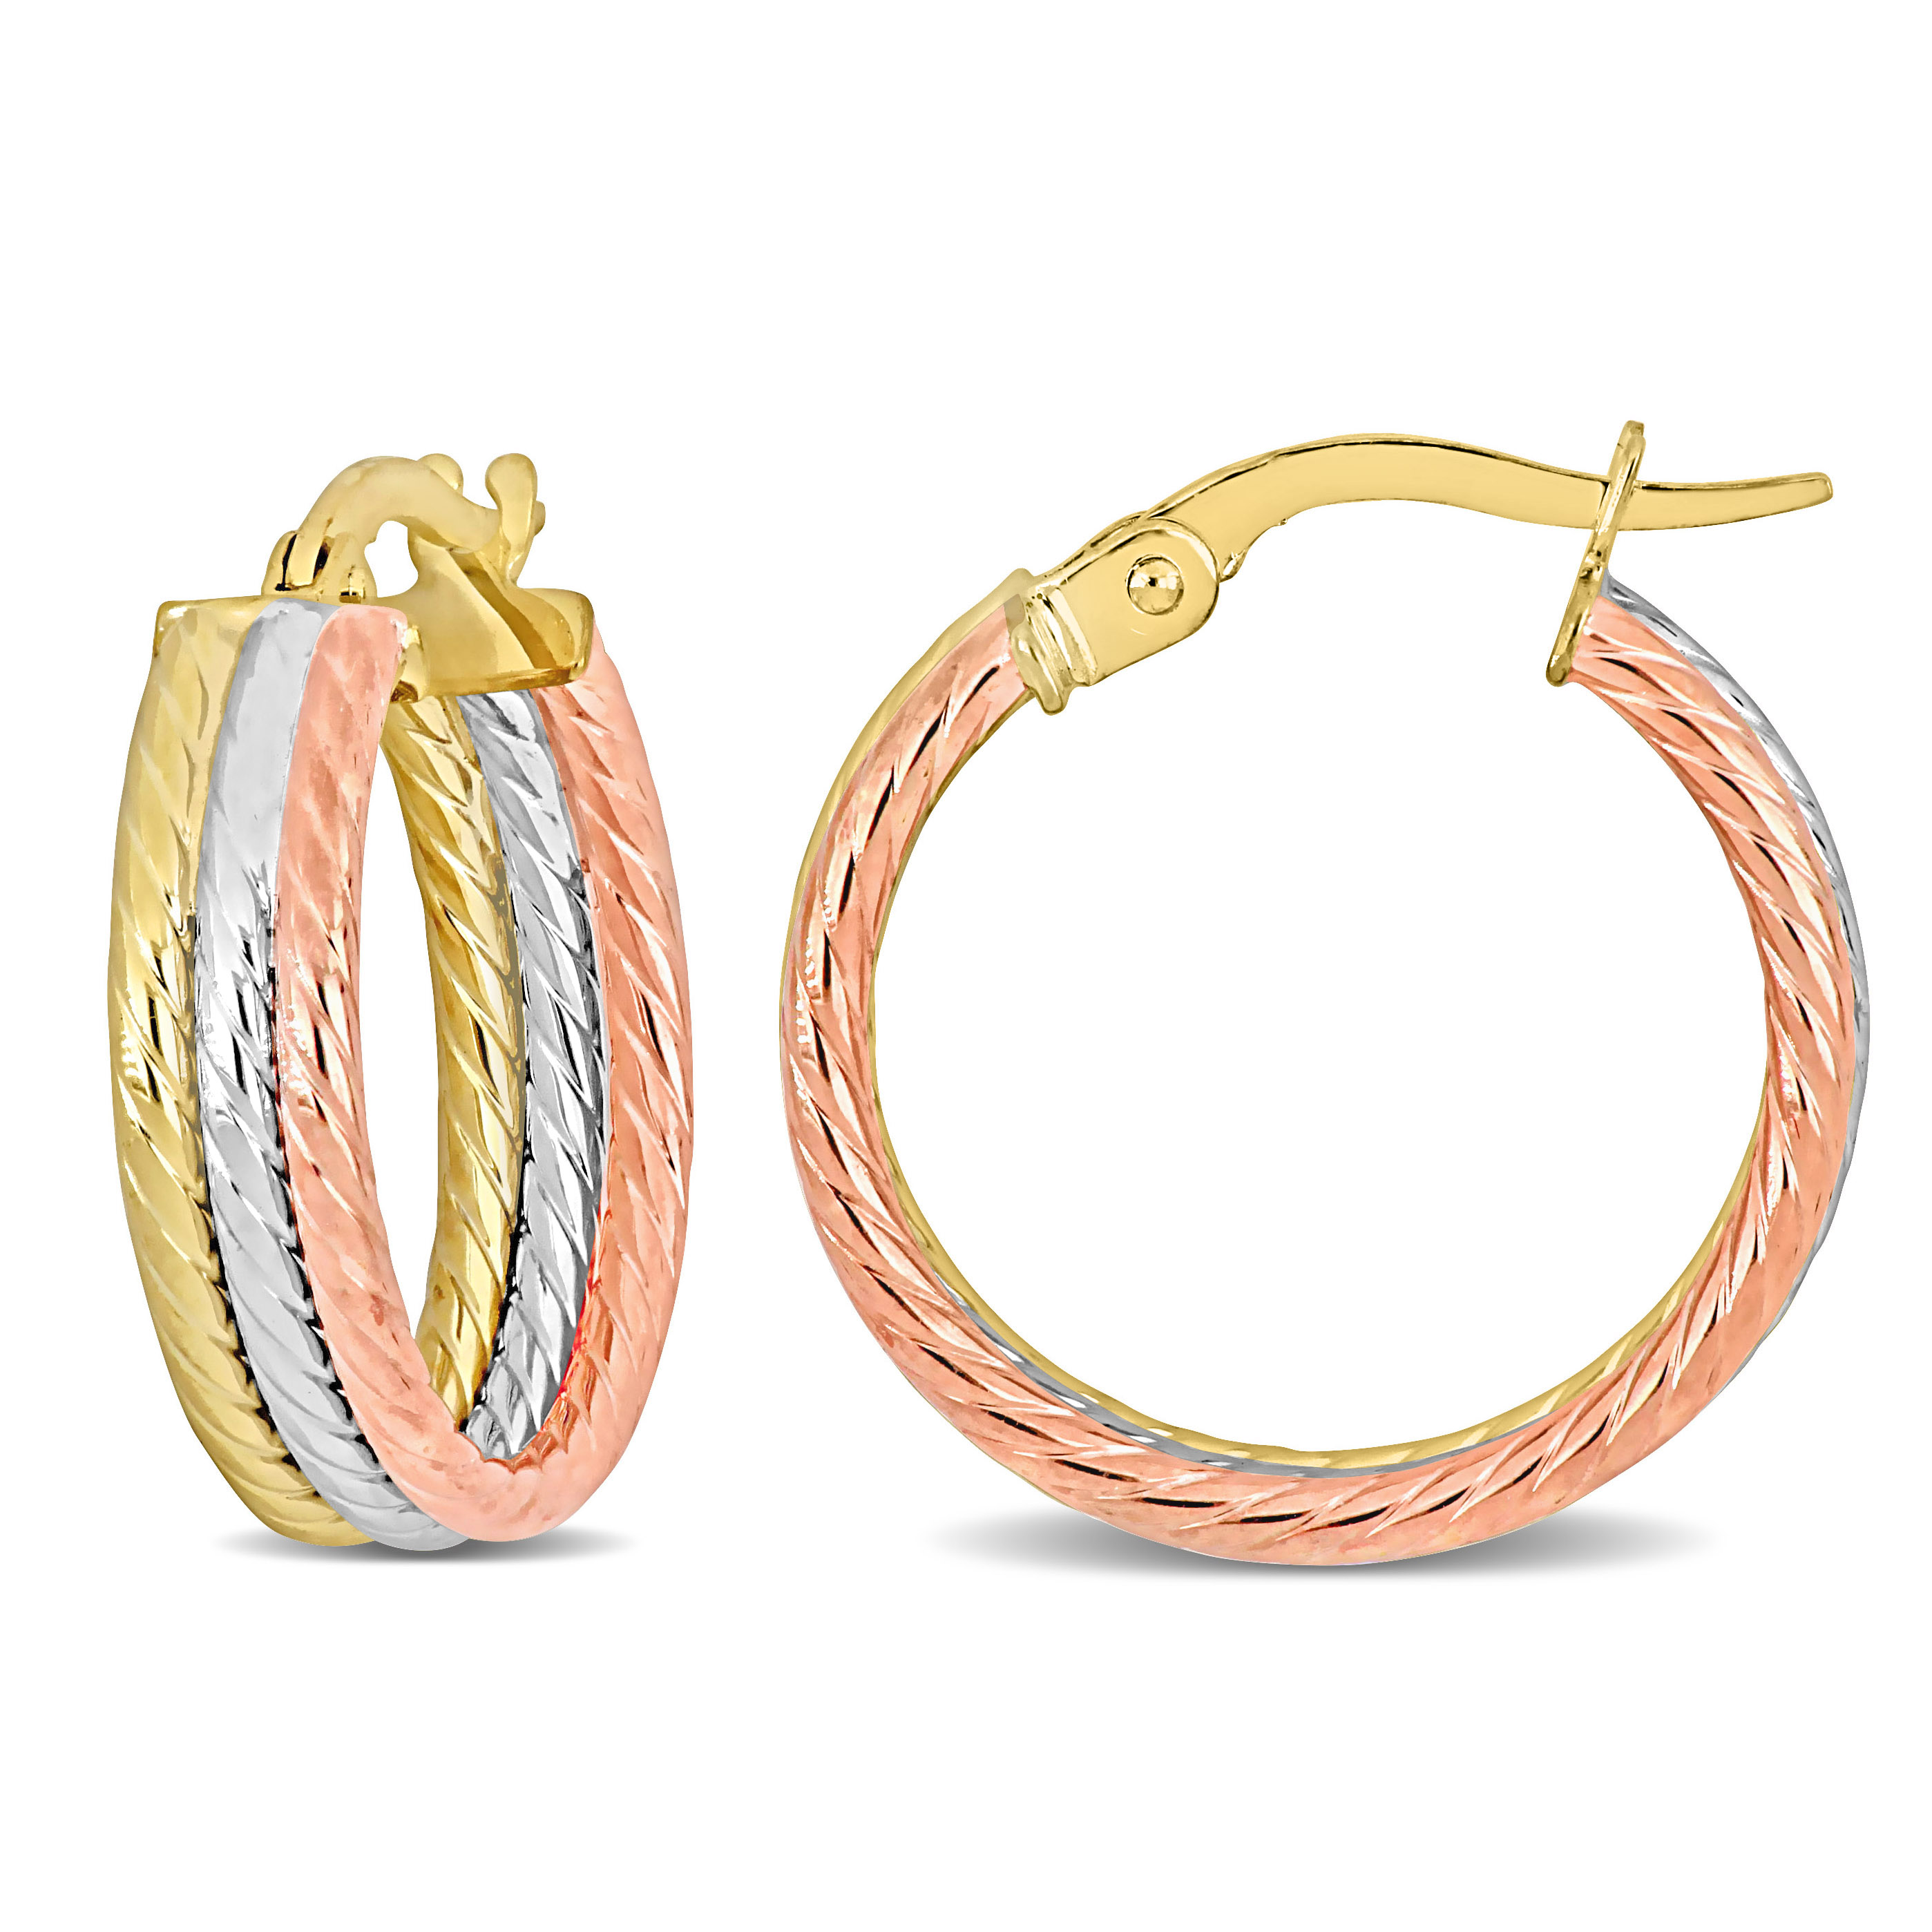 19 MM Triple Row Twisted Hoop Earrings in 3-Tone 10k Yellow, Rose and White Gold